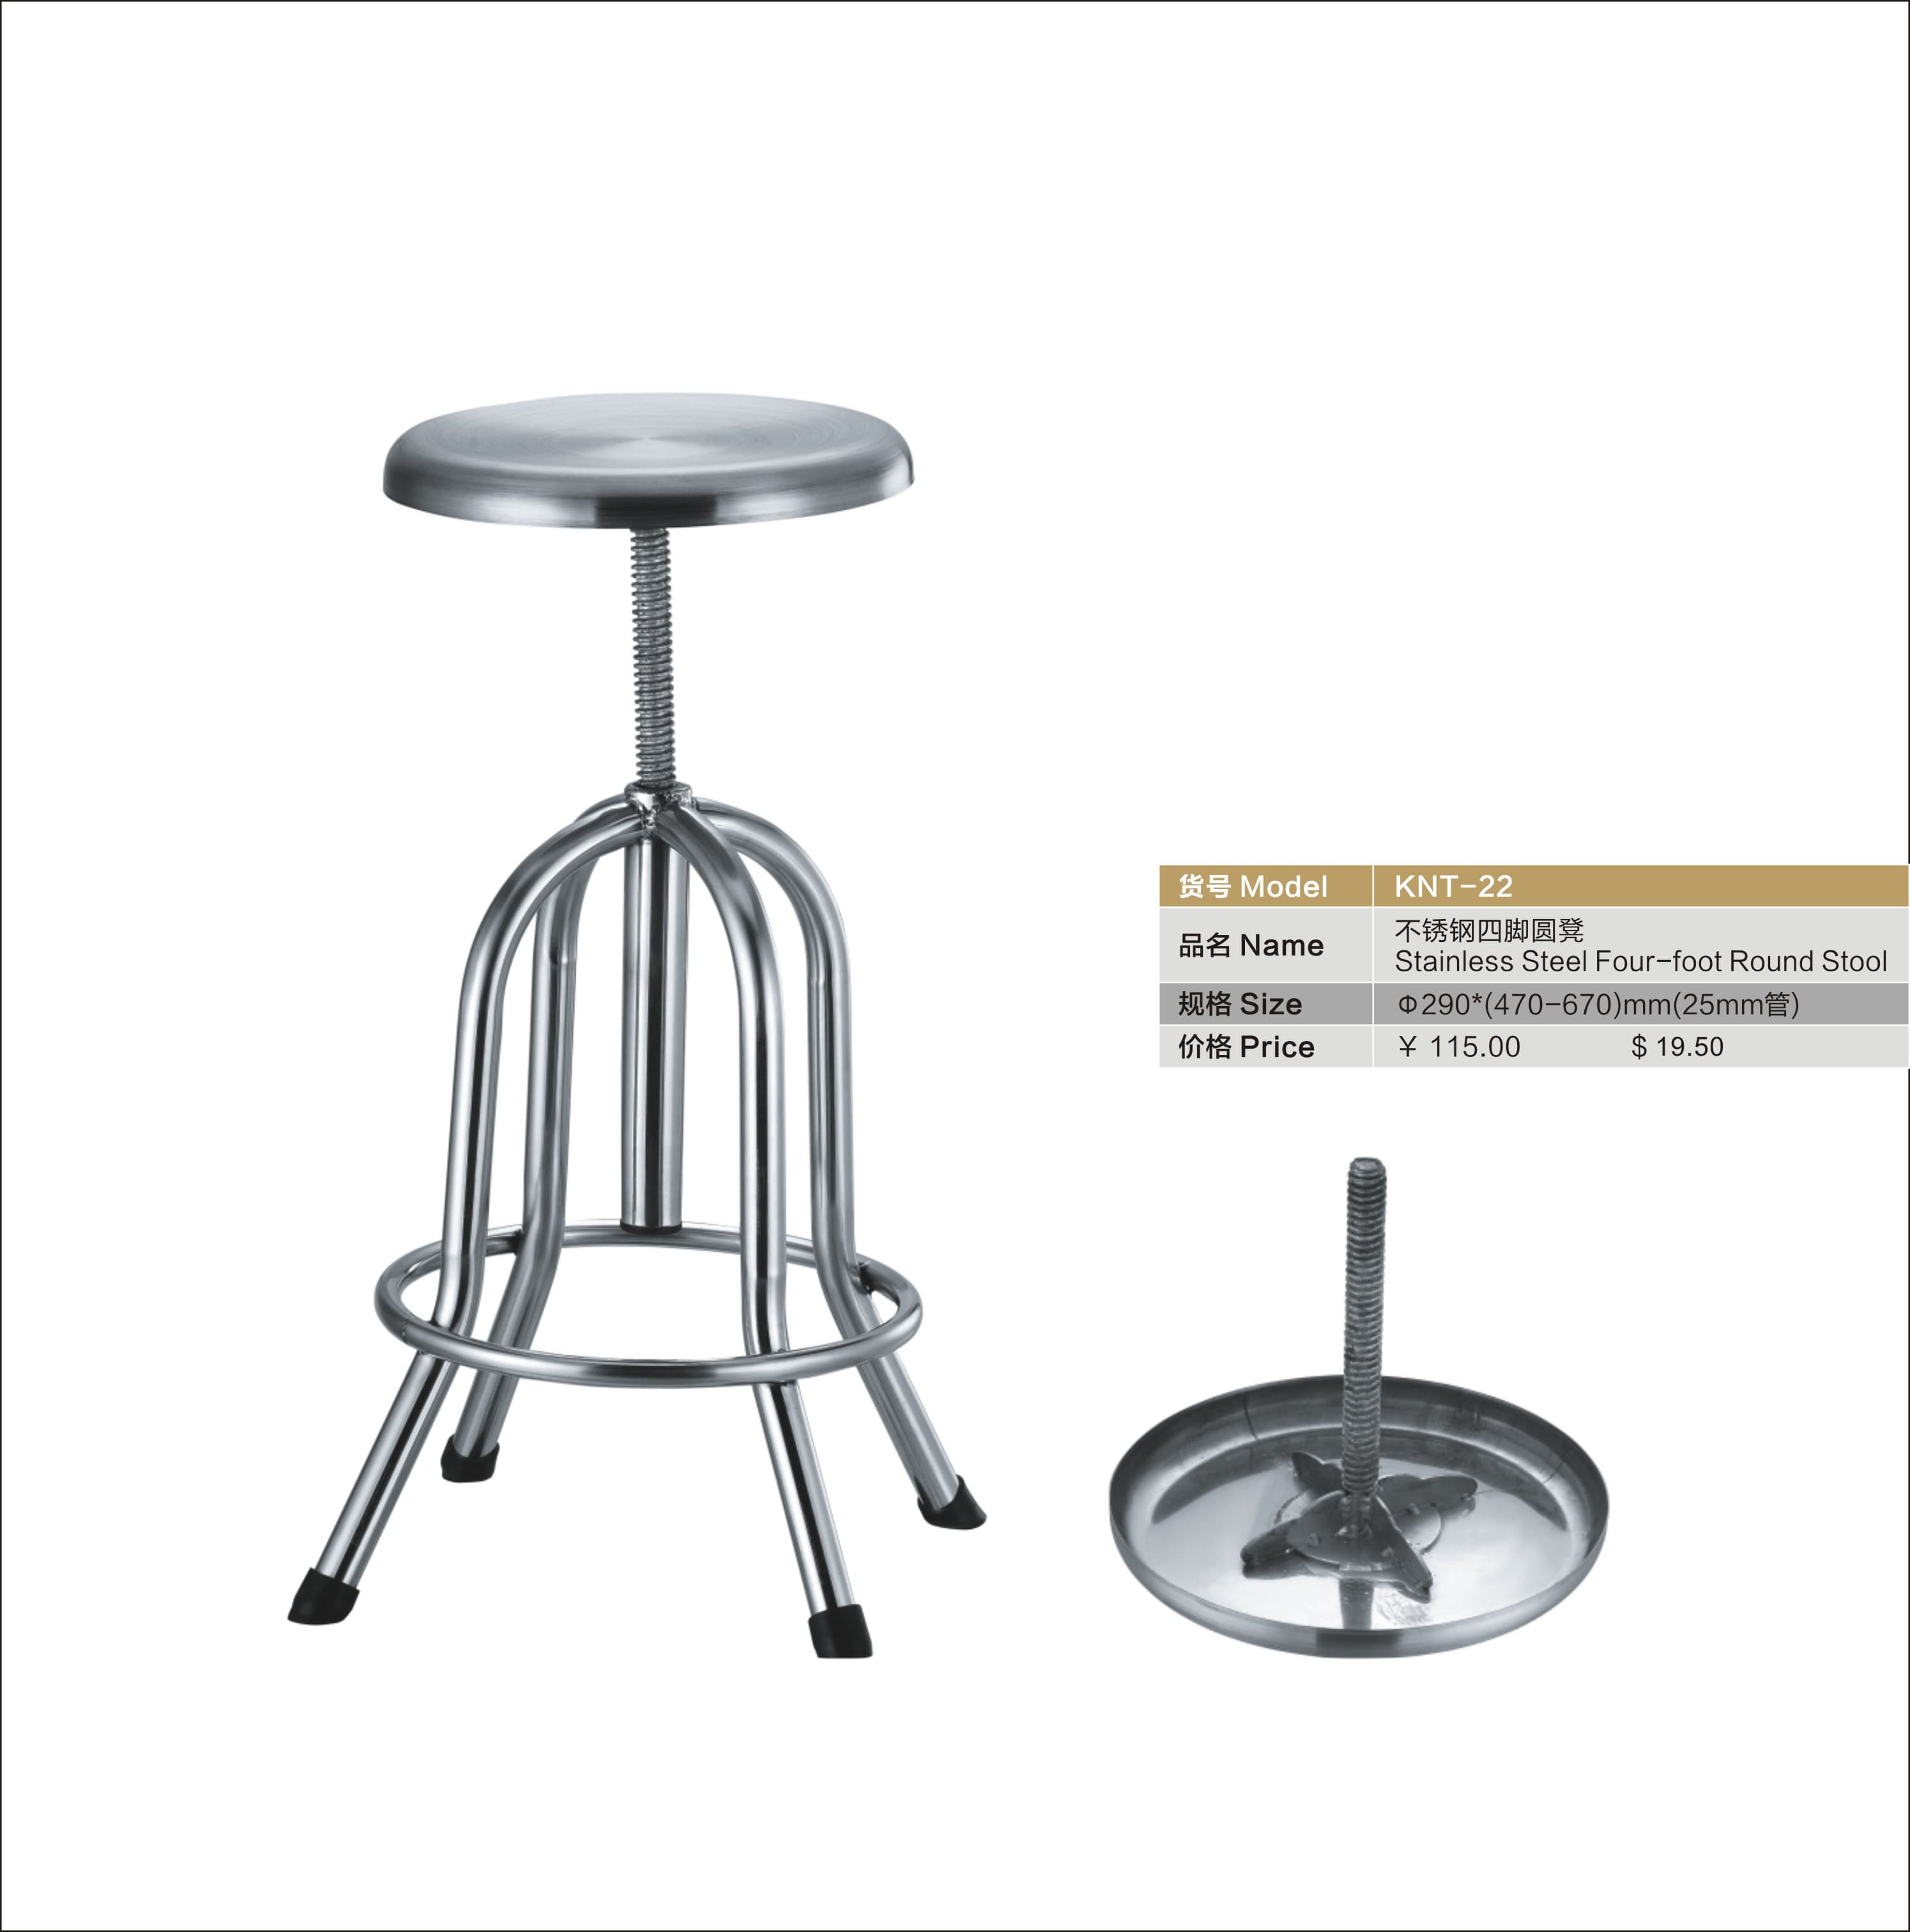 revolving stainless steel four_foot round stool